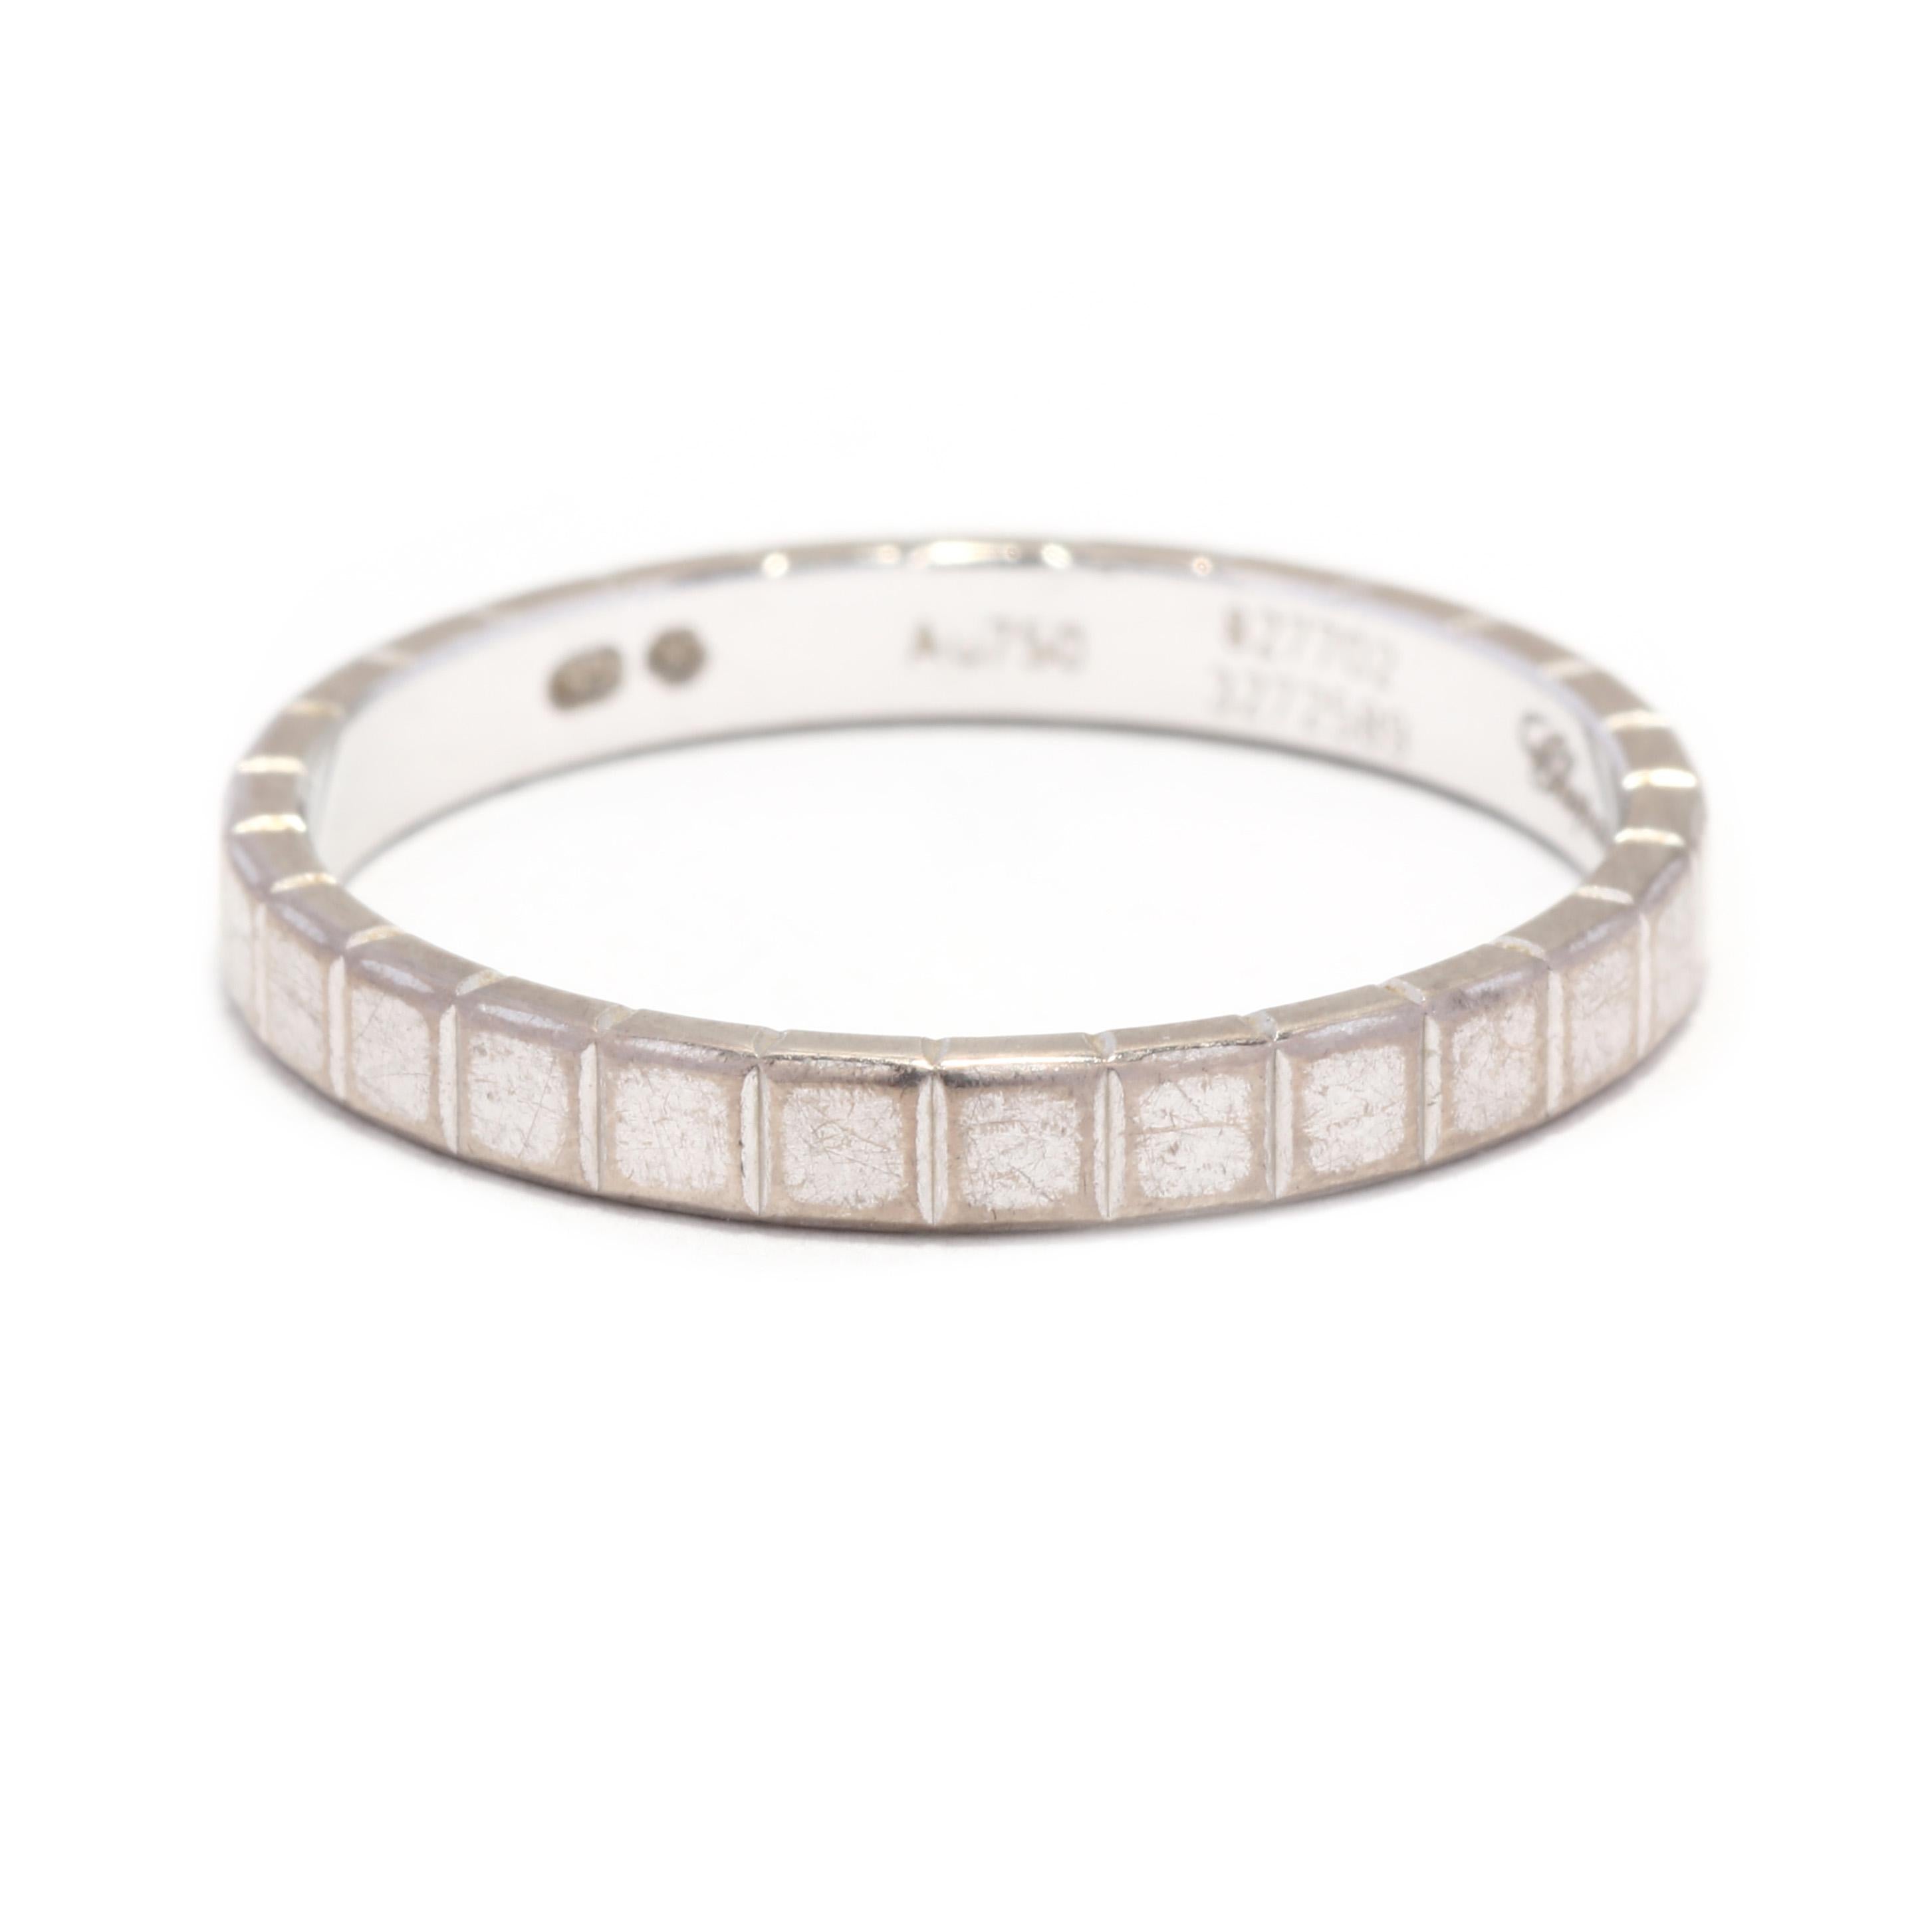 This Chopard Ice Cube eternity band ring is a beautiful piece of jewelry that will add a touch of elegance to any outfit. Made with 18K white gold, this ring is a size 7 and is perfect for everyday wear. The ring features a simple yet stunning ice